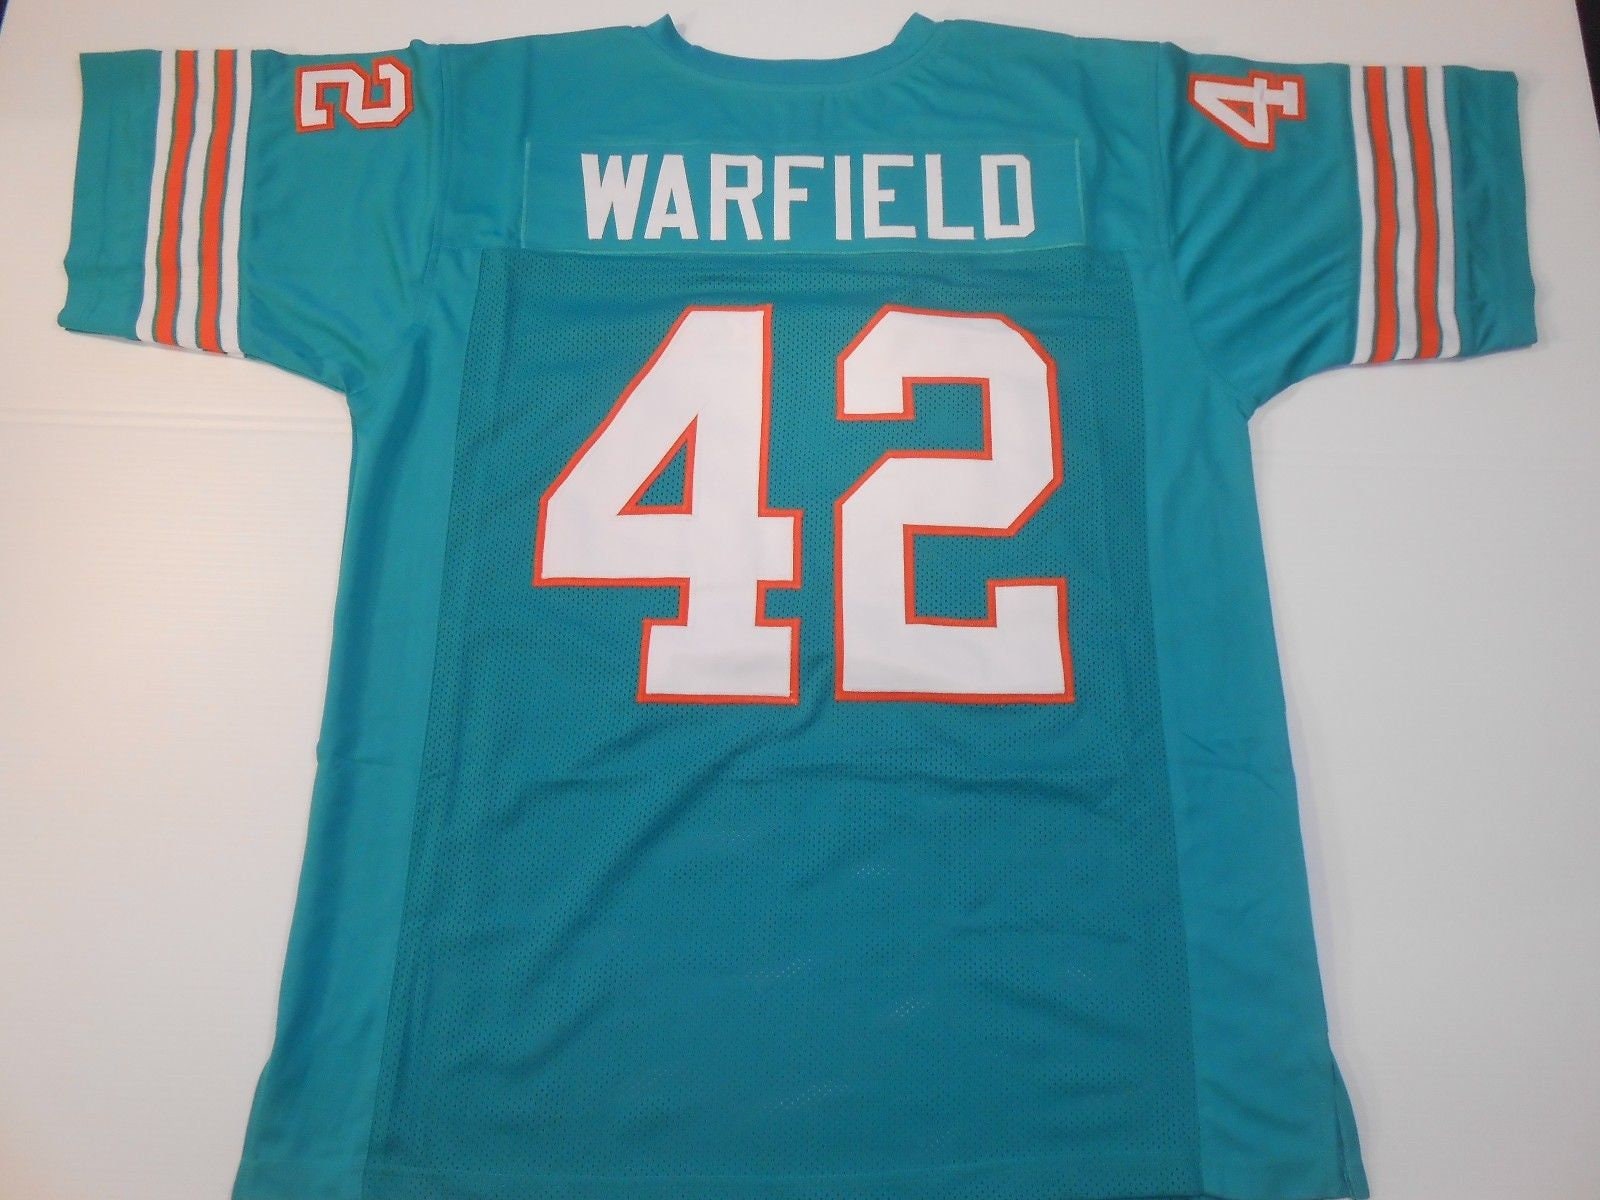 miami dolphins blue jersey